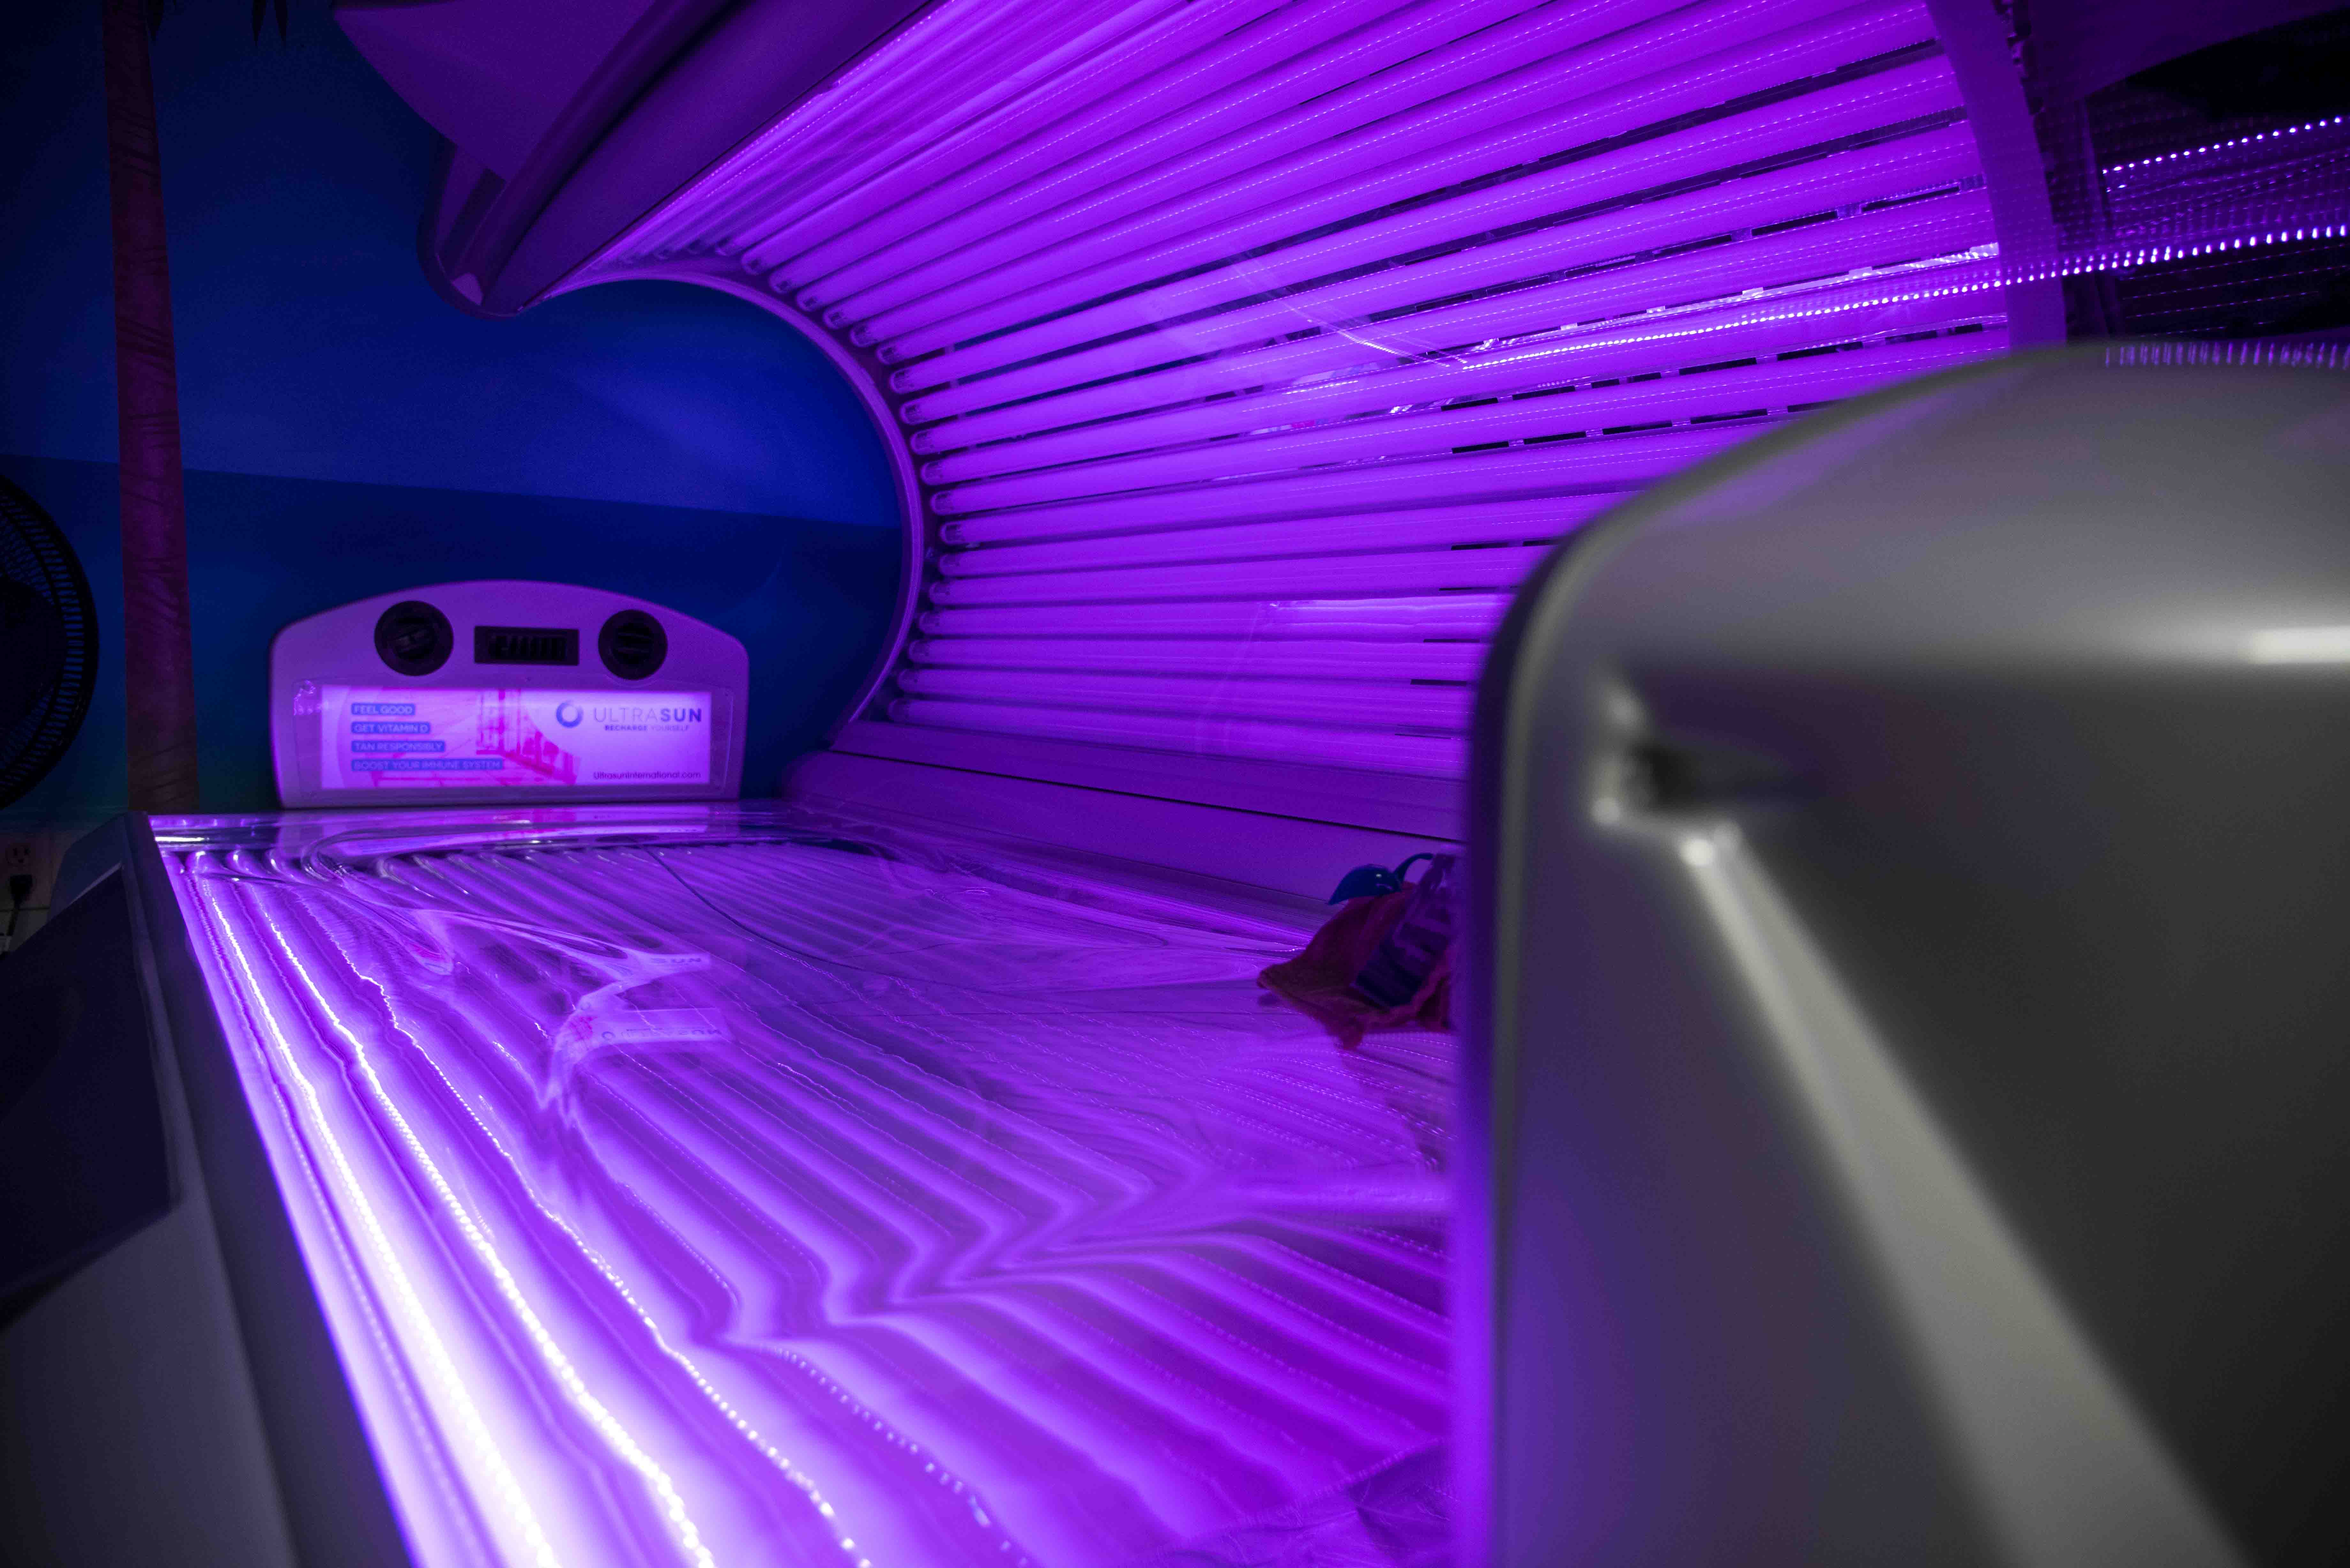 Tanning bed image.